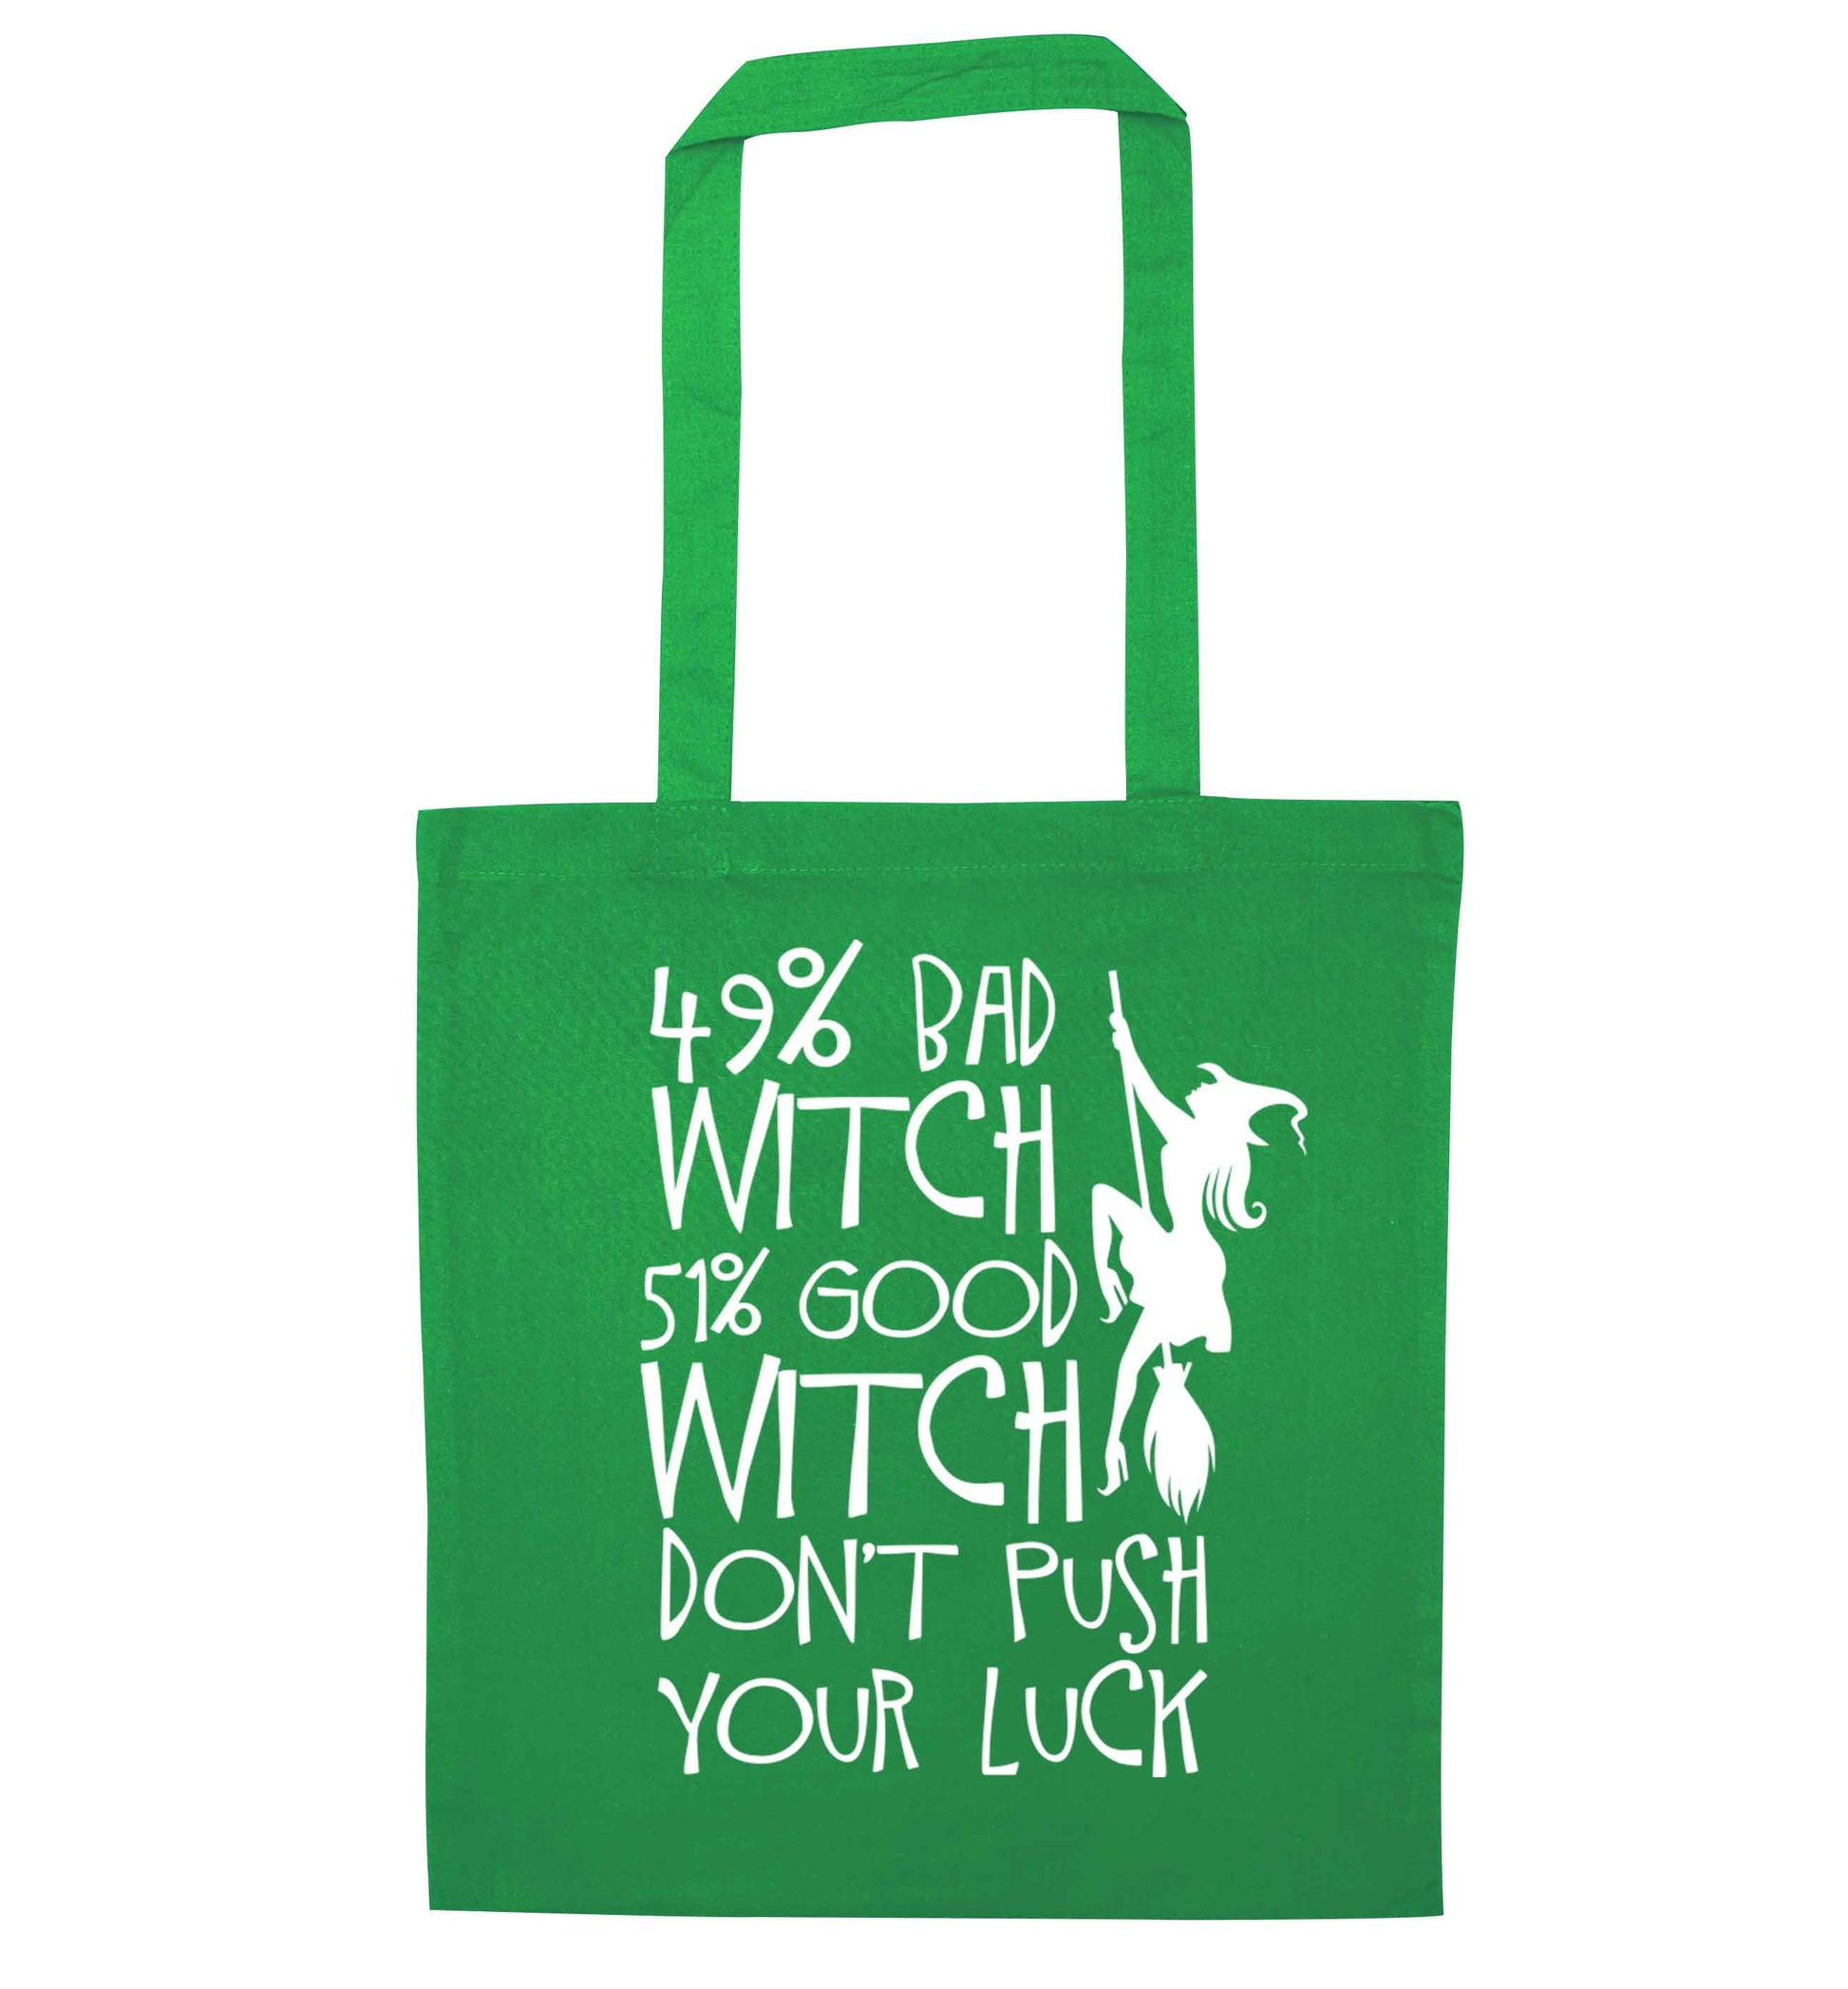 49% bad witch 51% good witch don't push your luck green tote bag